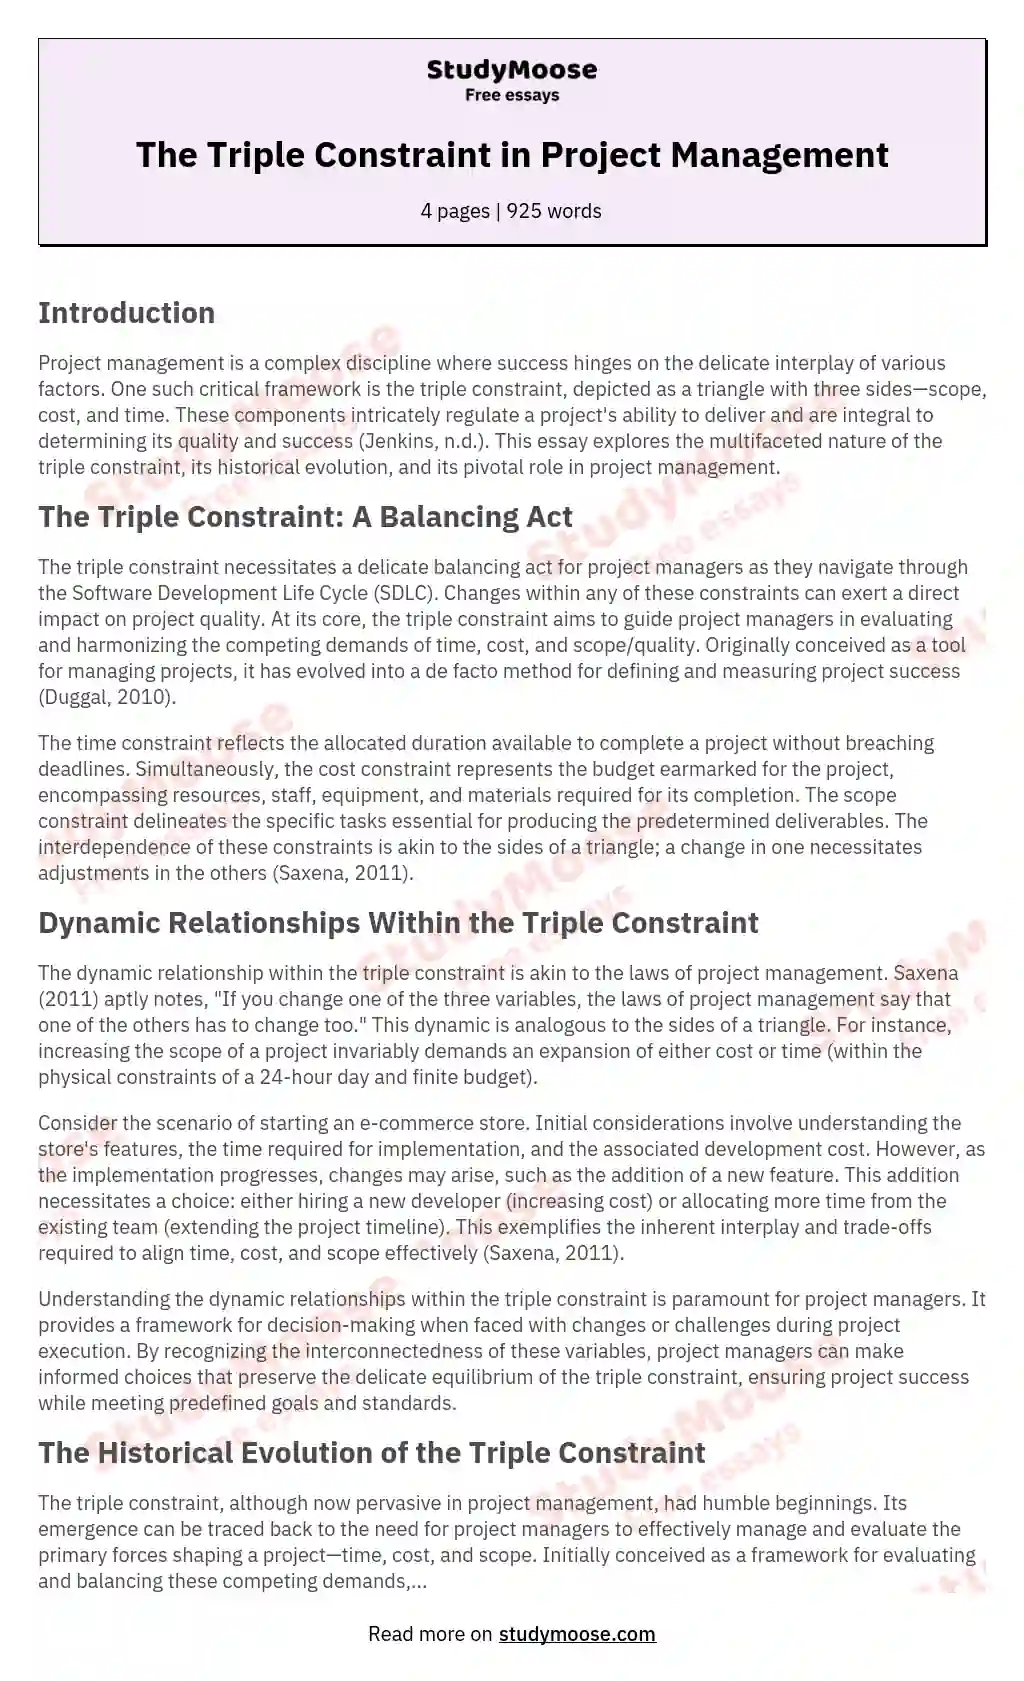 The Triple Constraint in Project Management essay